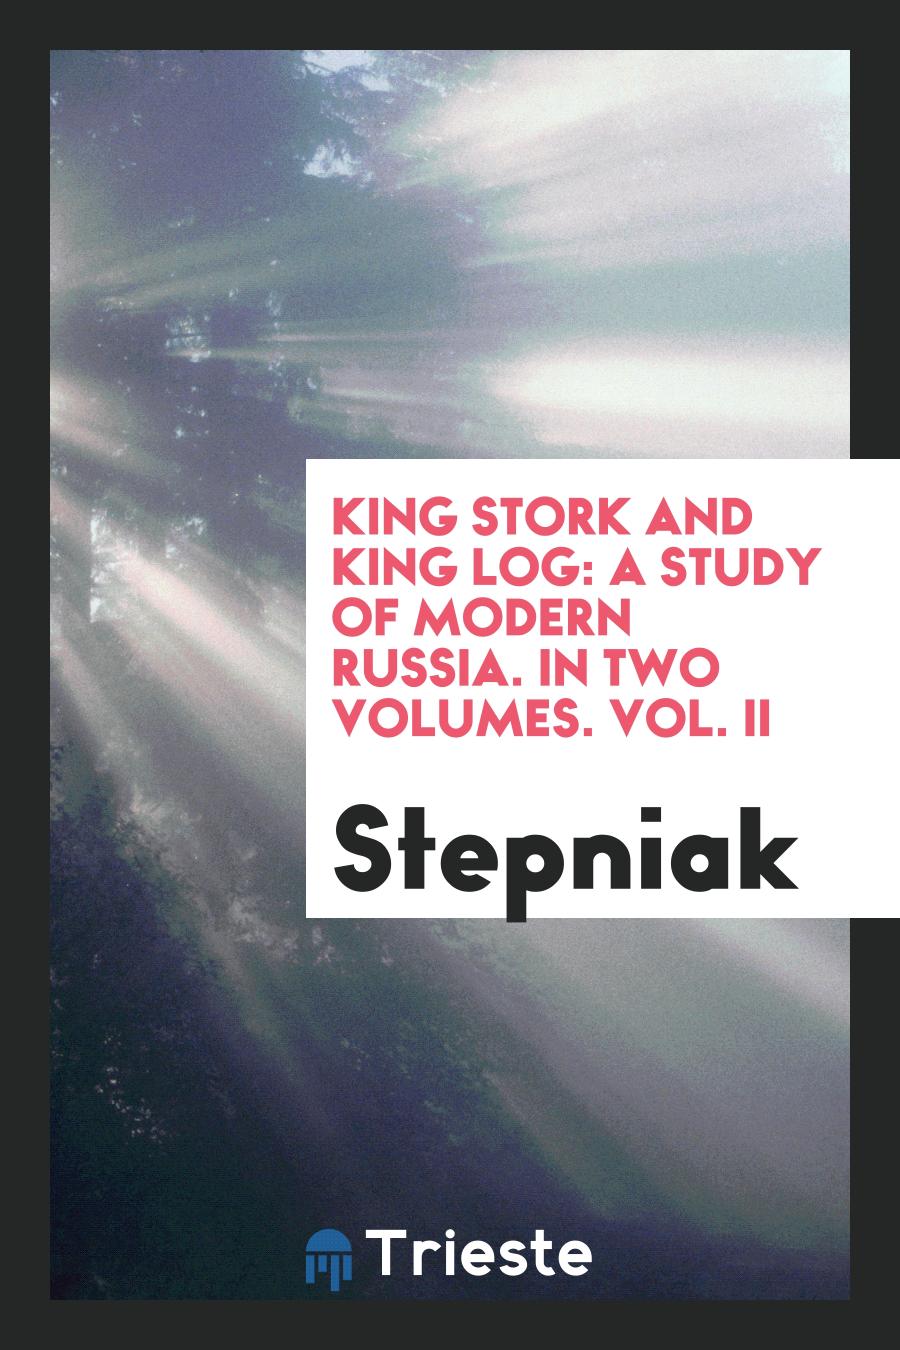 King Stork and King Log: A Study of Modern Russia. In Two Volumes. Vol. II